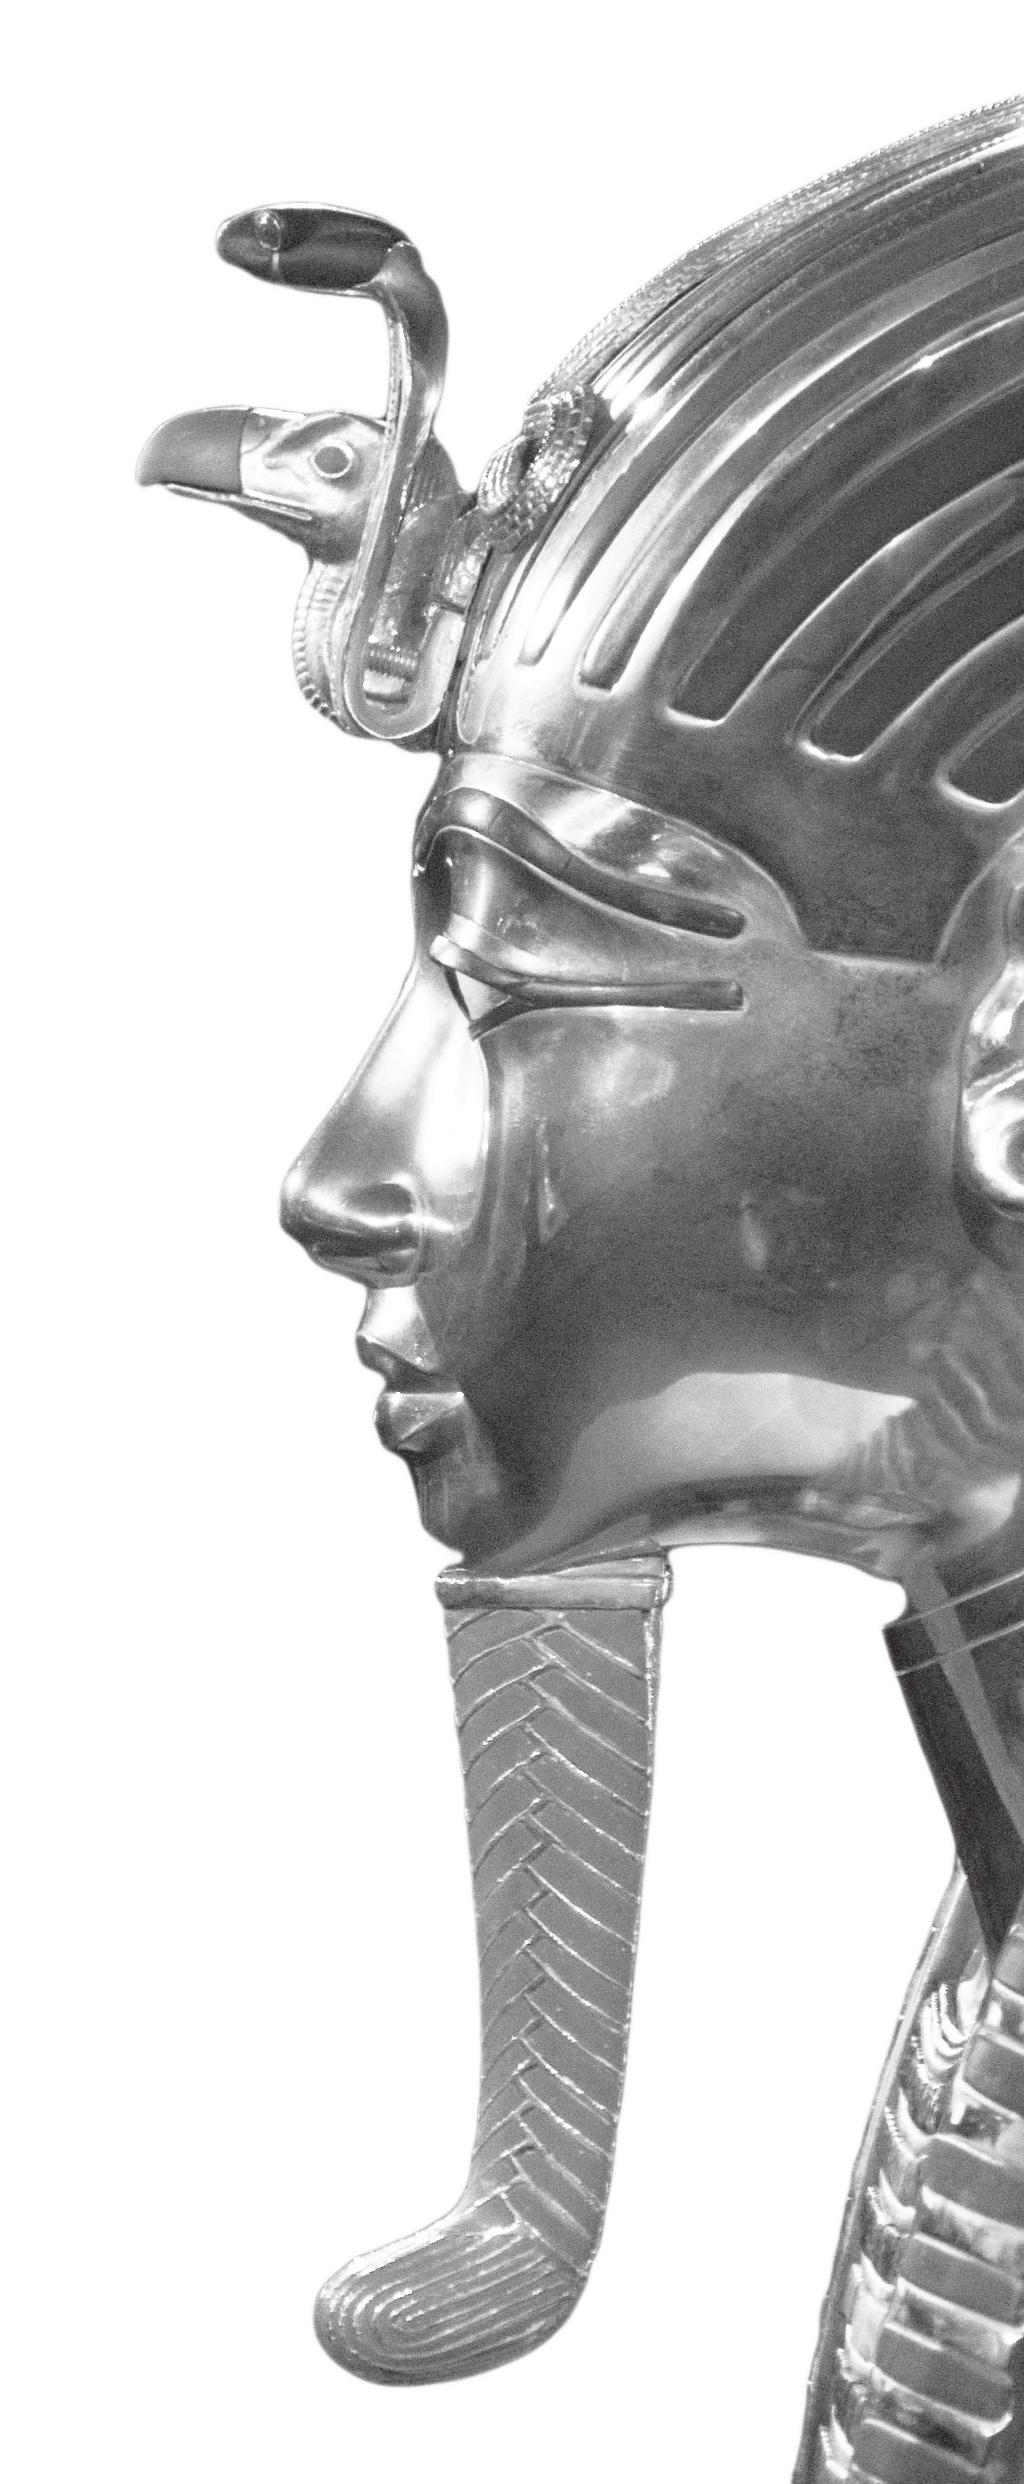 TUTANKHAMUN: Wonderful Things from the Pharaoh s Tomb January 21 - May 6, 2018 Exhibition Guide NOTE: This exhibition includes all items listed, though they may be in different areas of the gallery